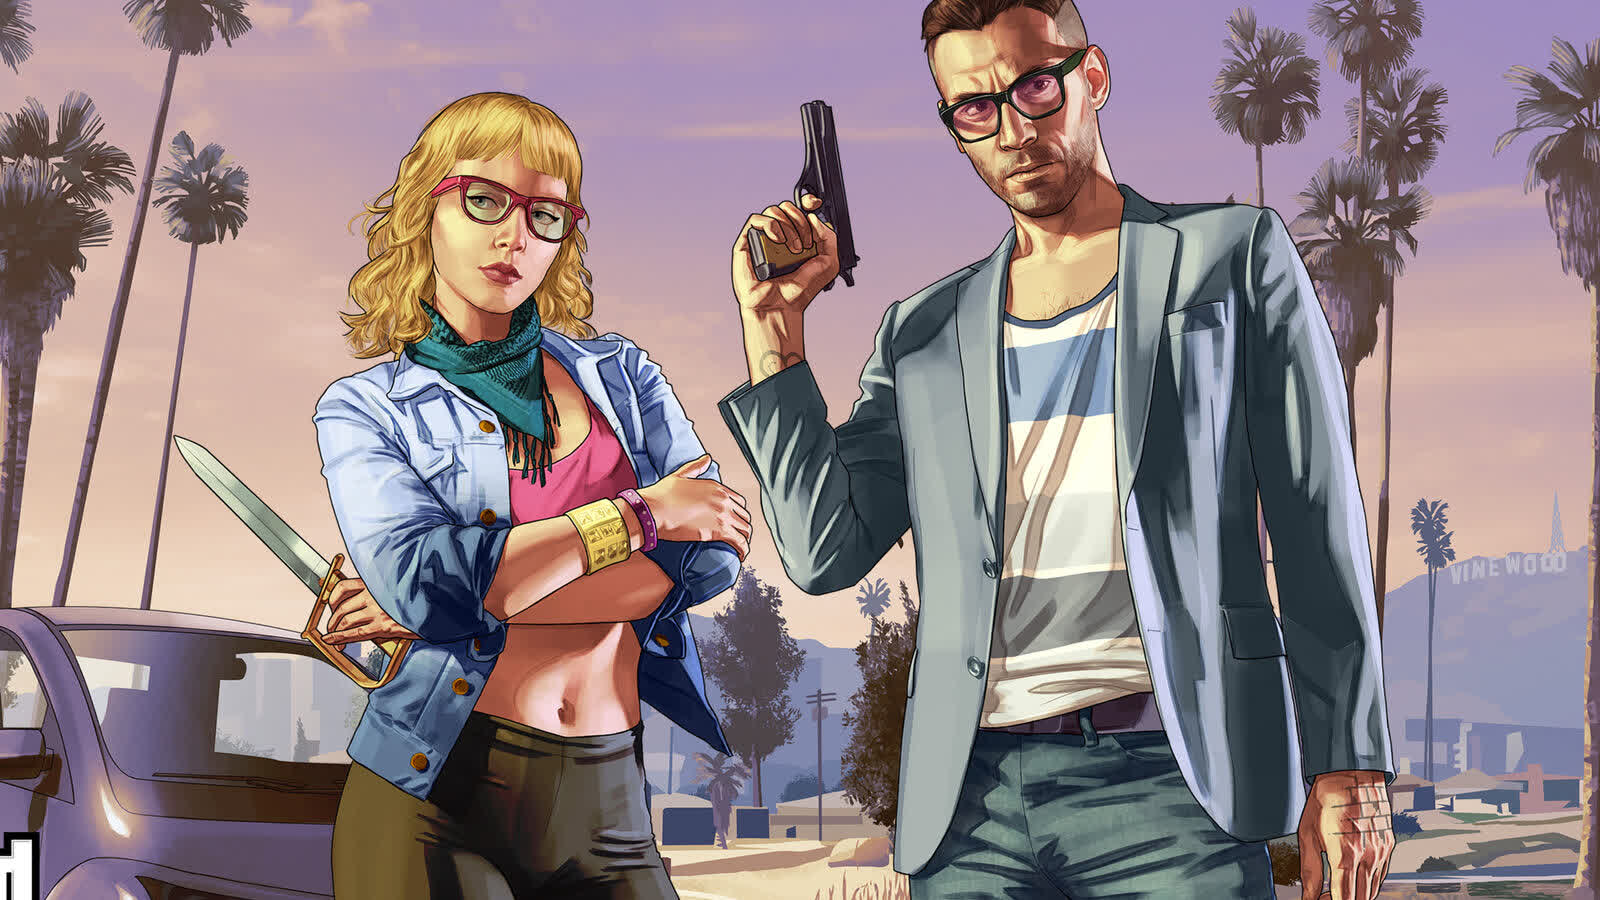 GTA 6 leakers may be the target of an FBI investigation